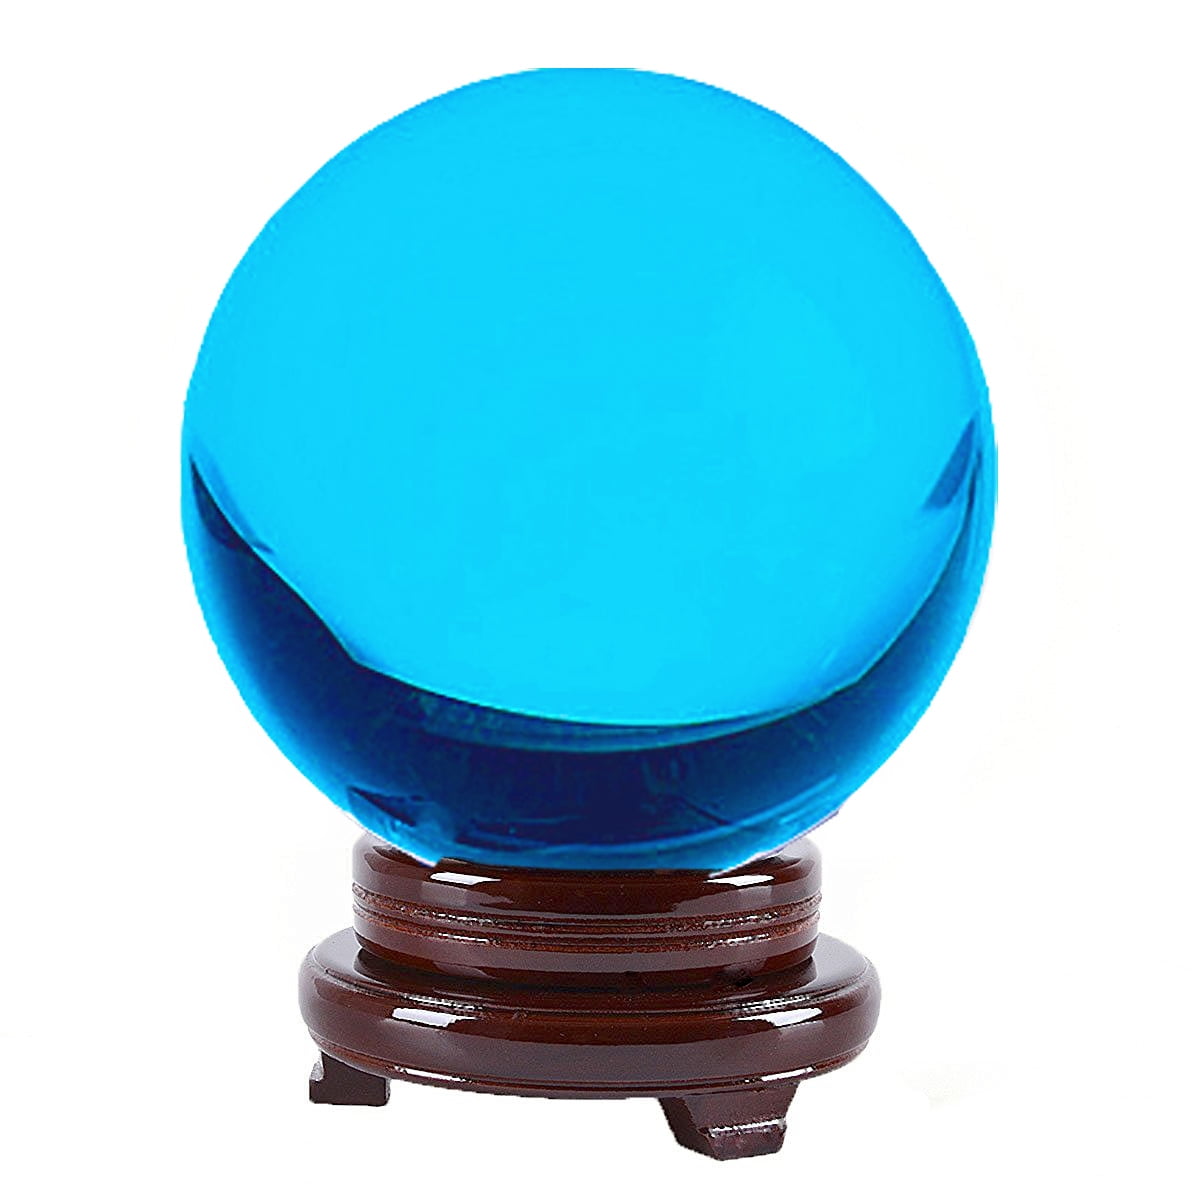 Amlong Crystal 6 (150mm) Crystal Ball with Wood Stand 